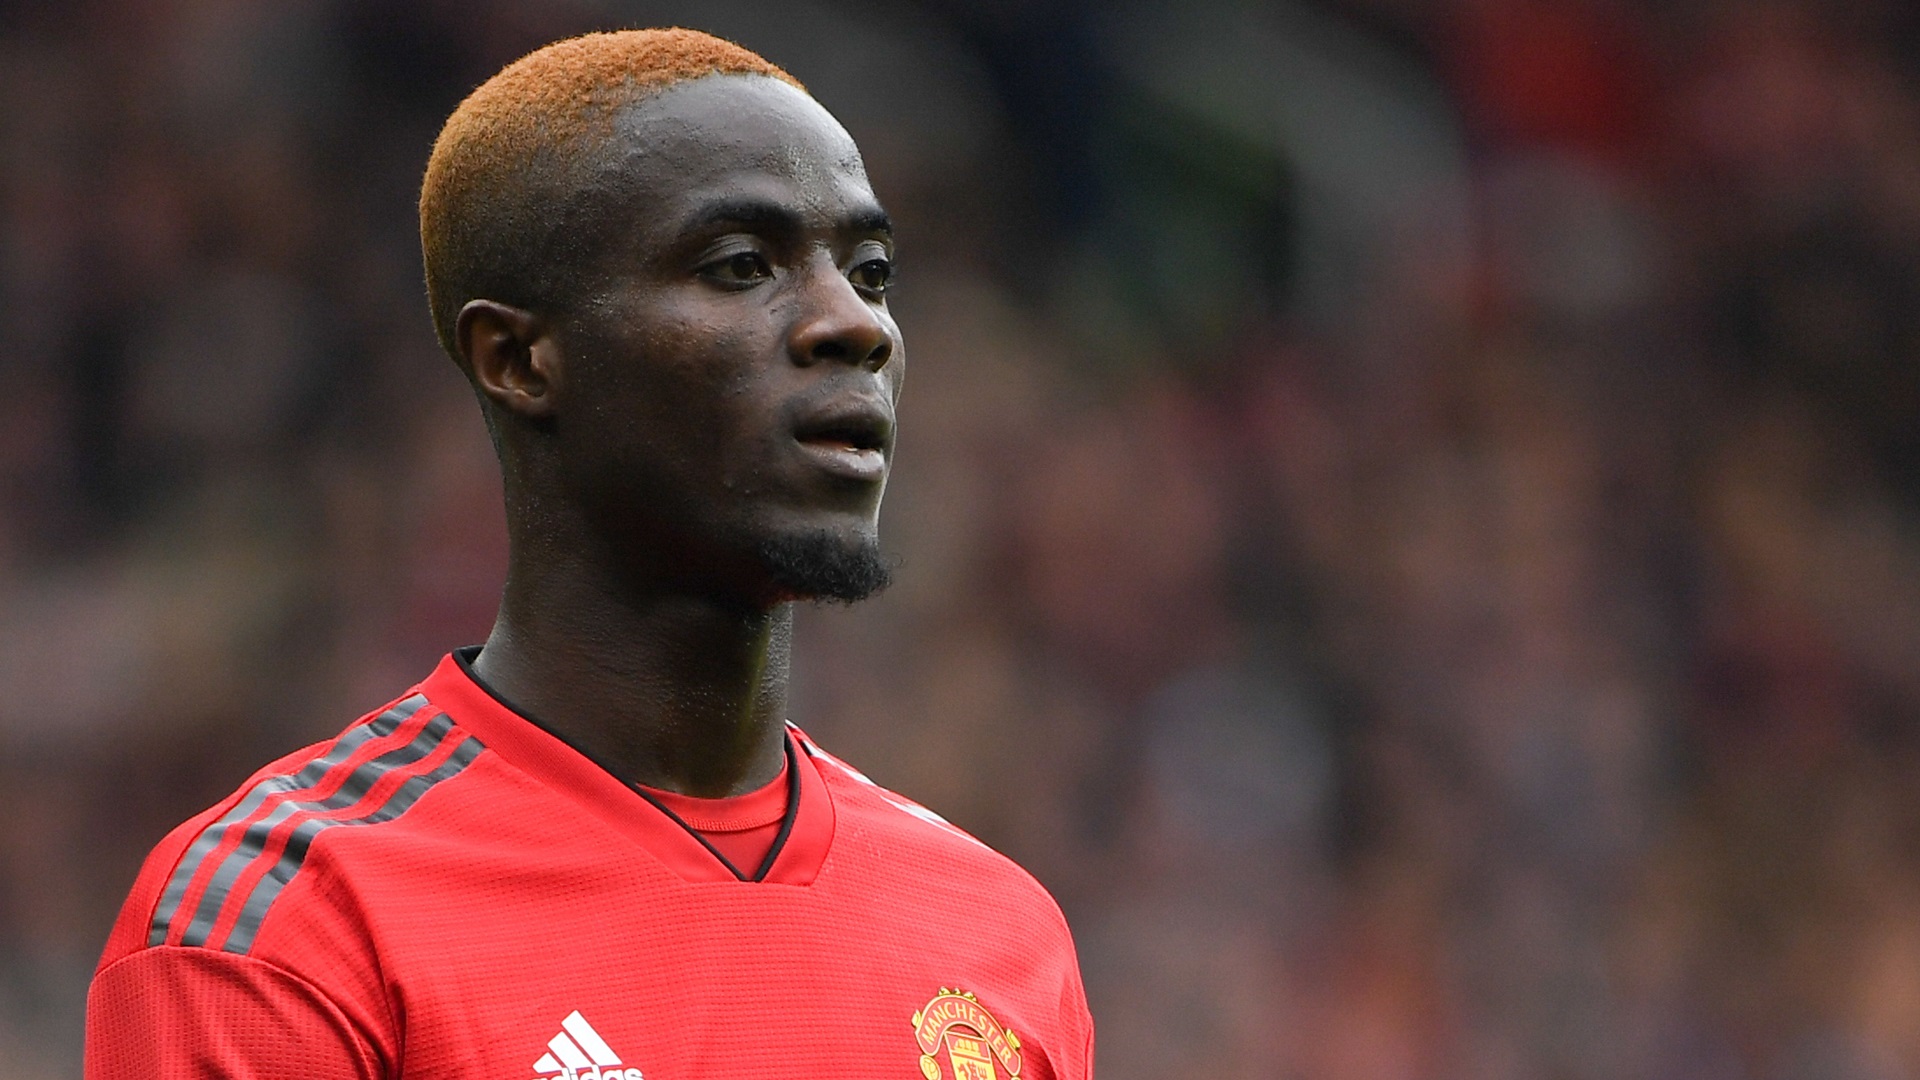 Bailly: Oliseh urges fans to pray for Manchester United star after latest injury